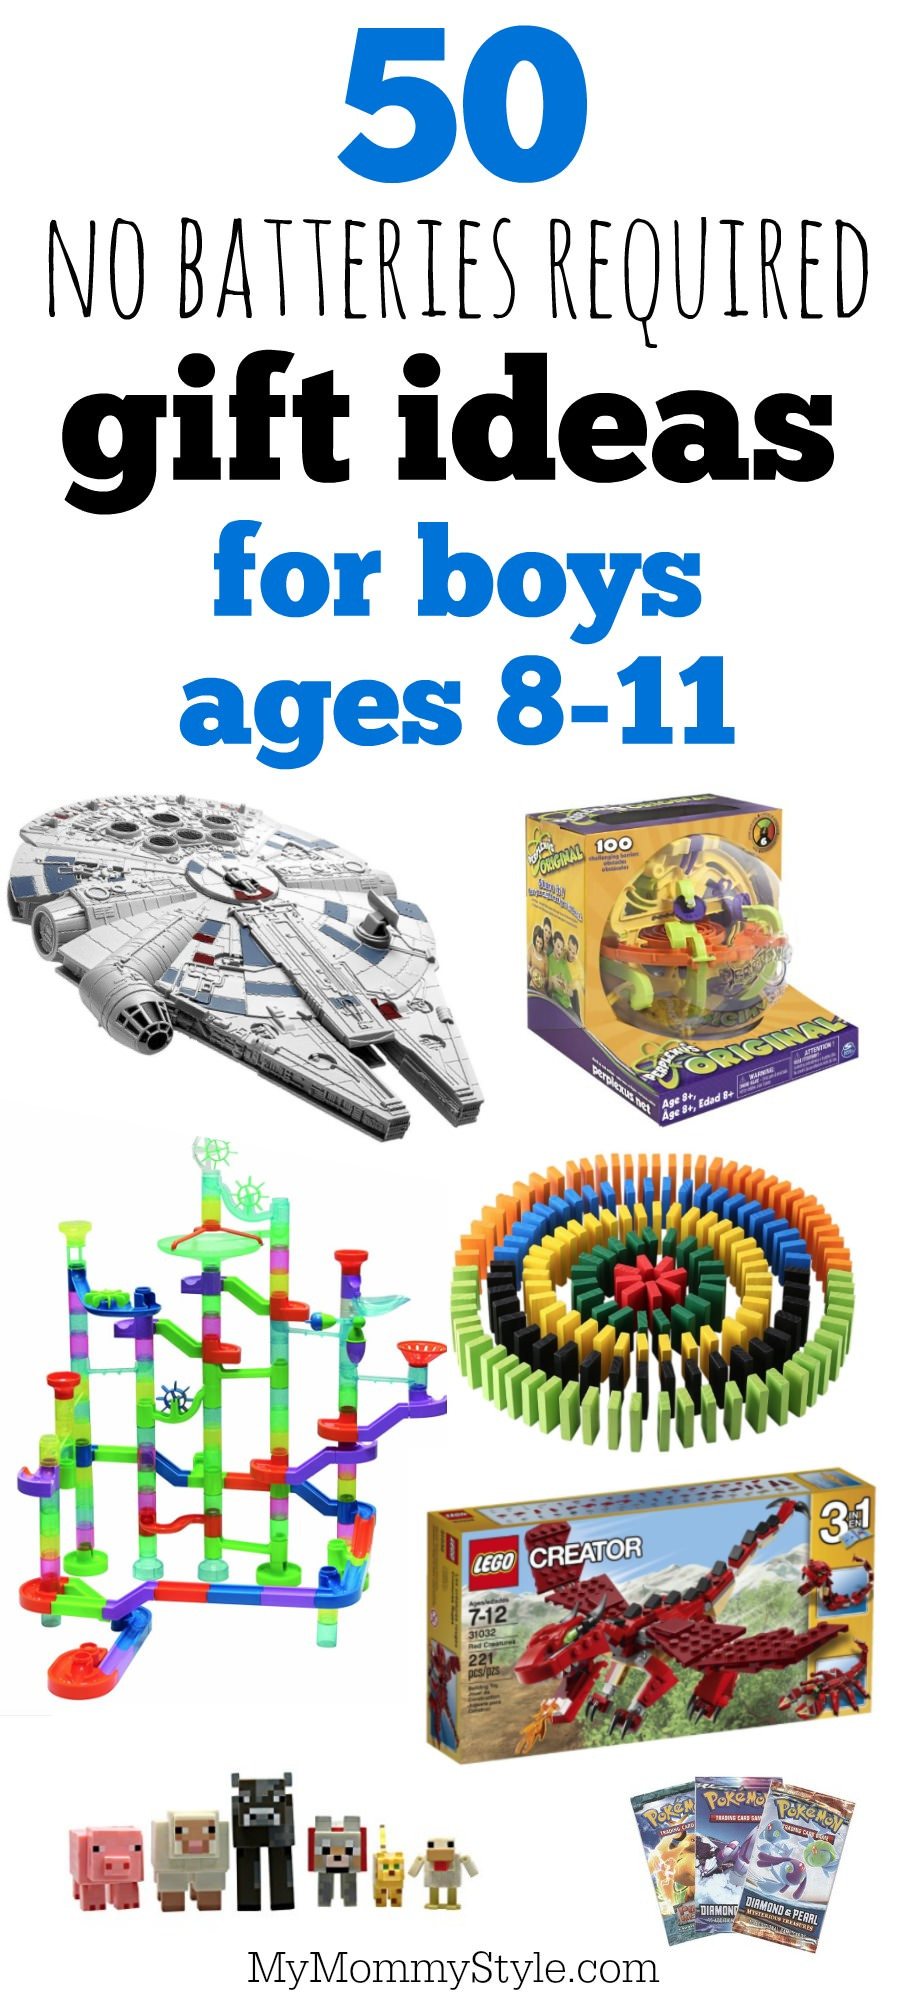 Gift Ideas For Boys Age 14
 50 battery free t ideas for boys ages 8 11 My Mommy Style